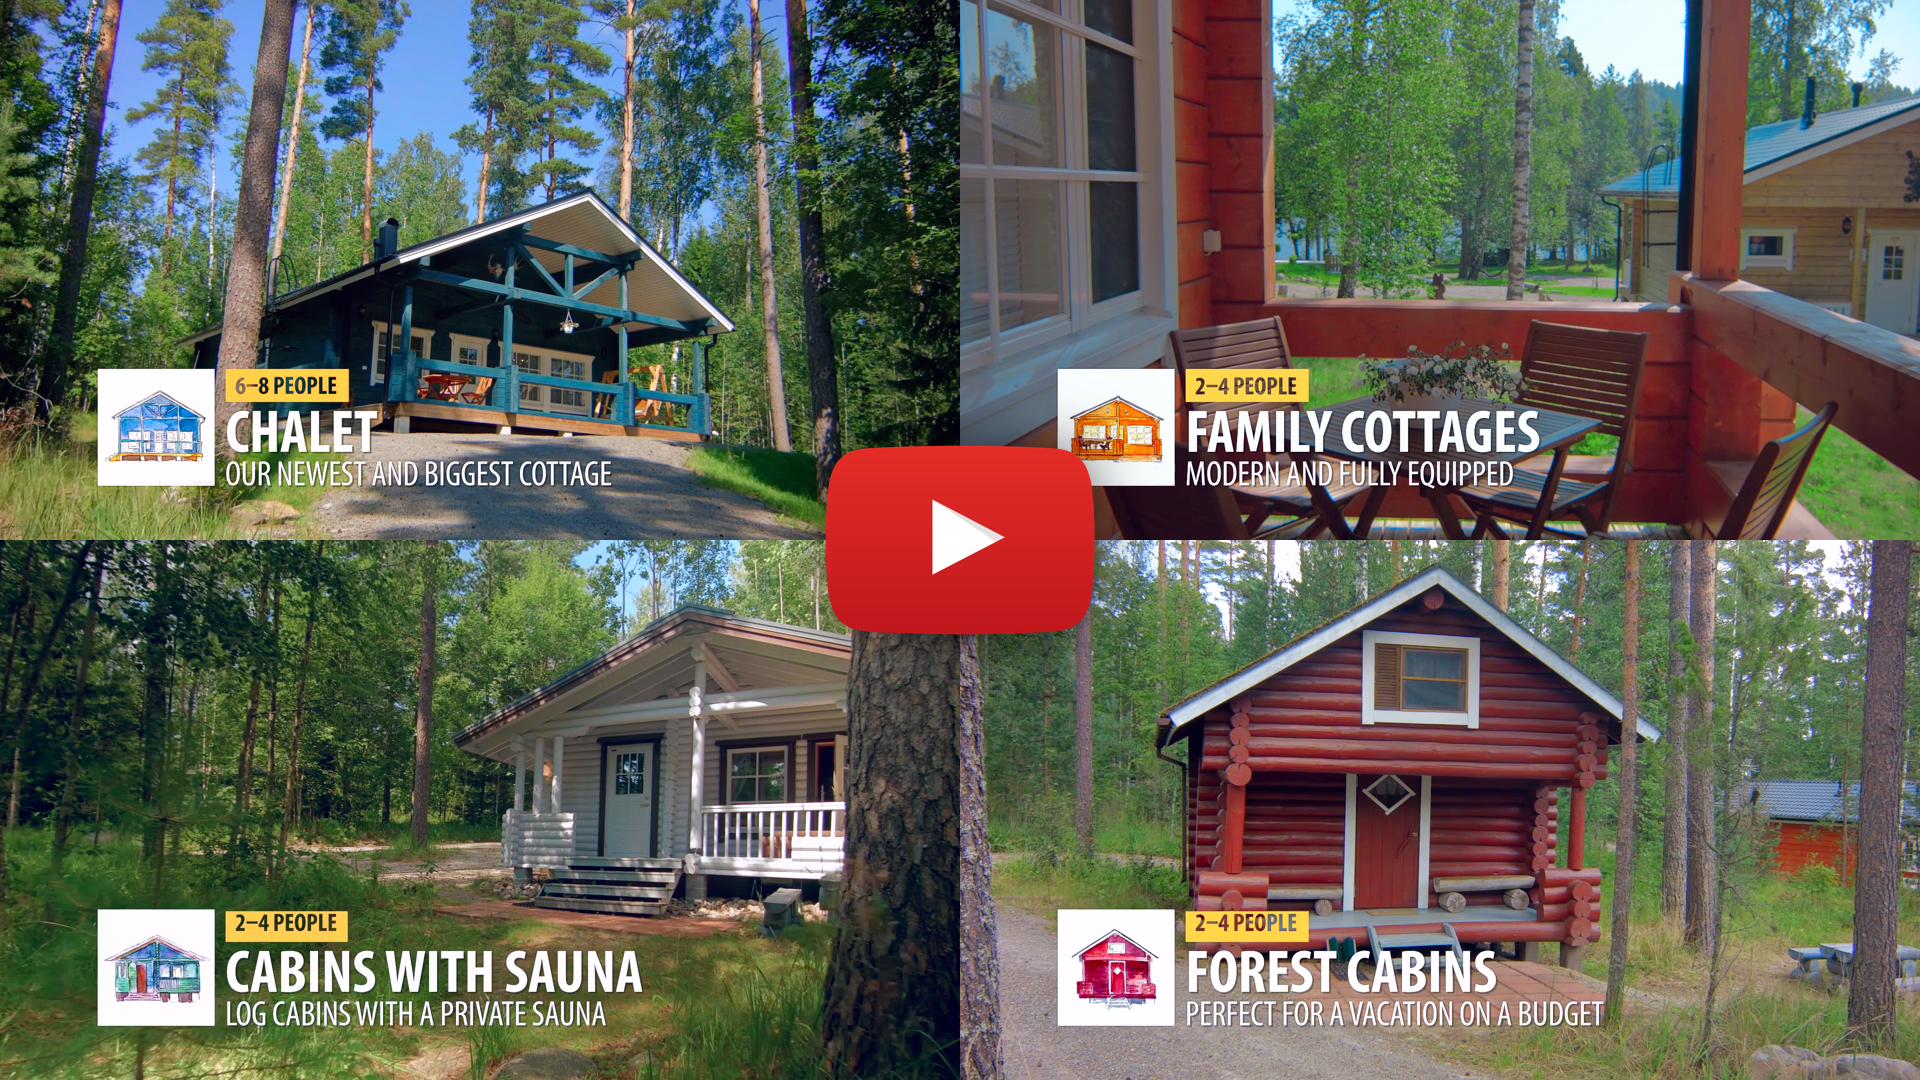 Check out a video about our cottages.